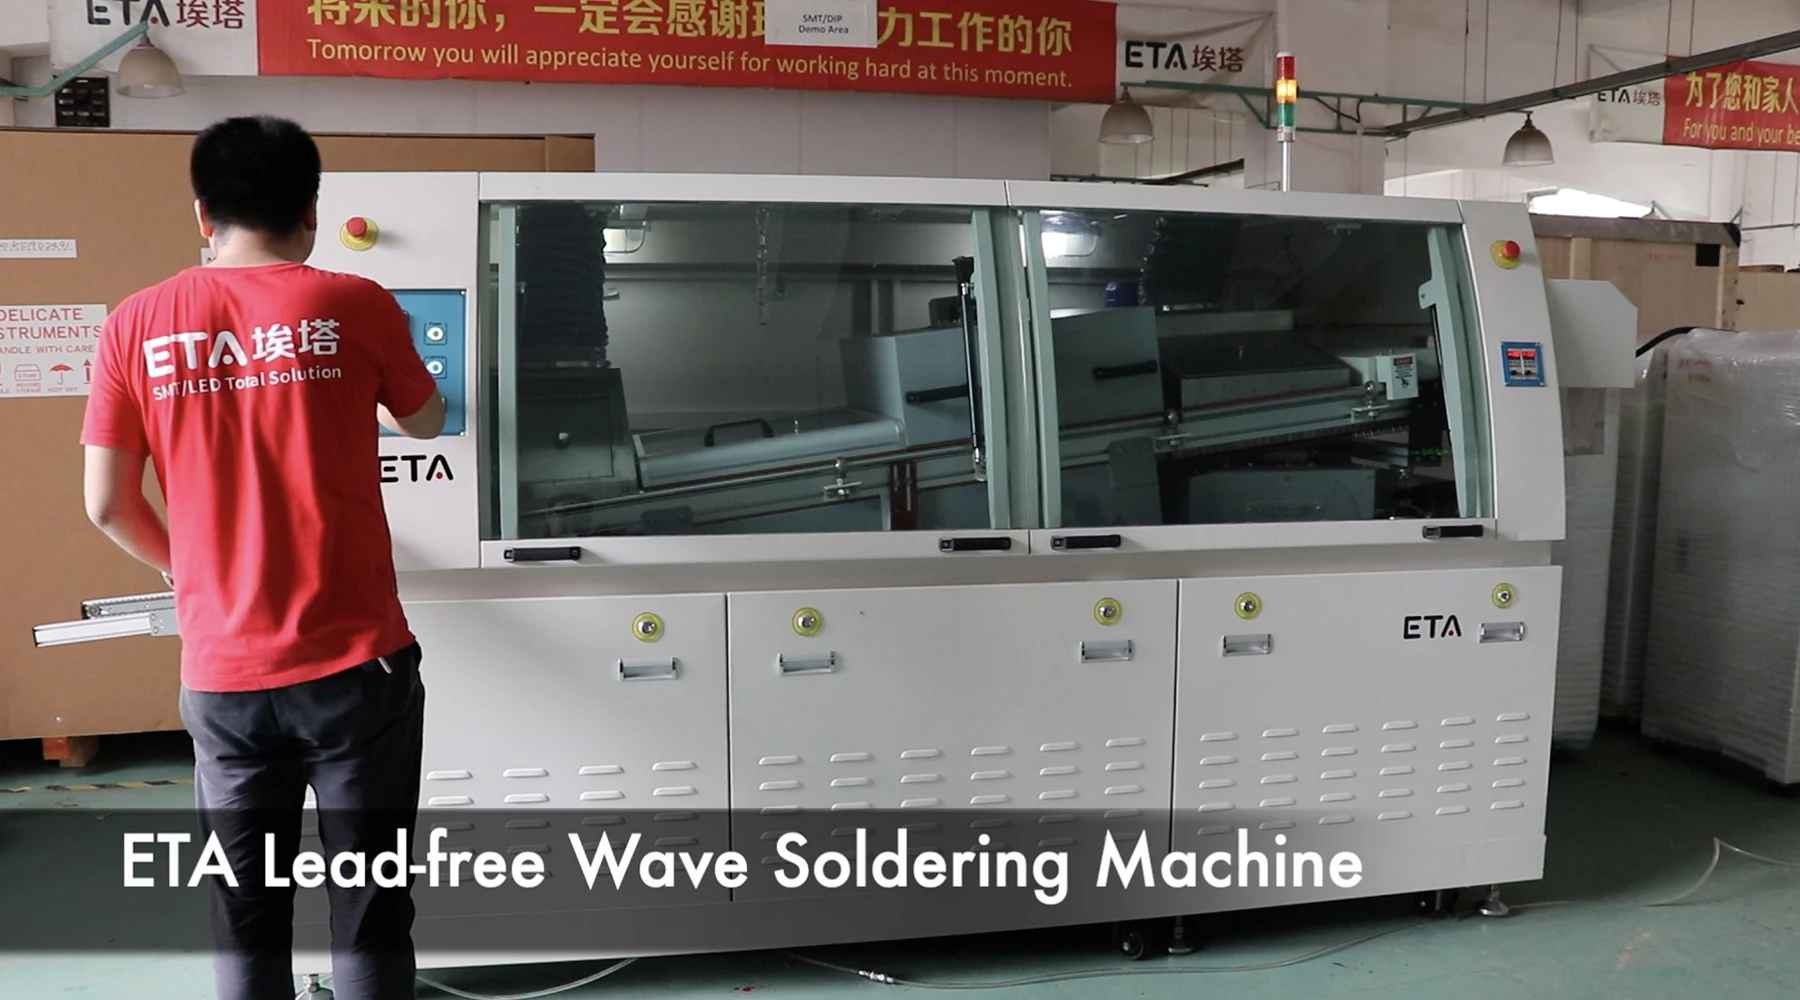 How the Wave Soldering Machine Works